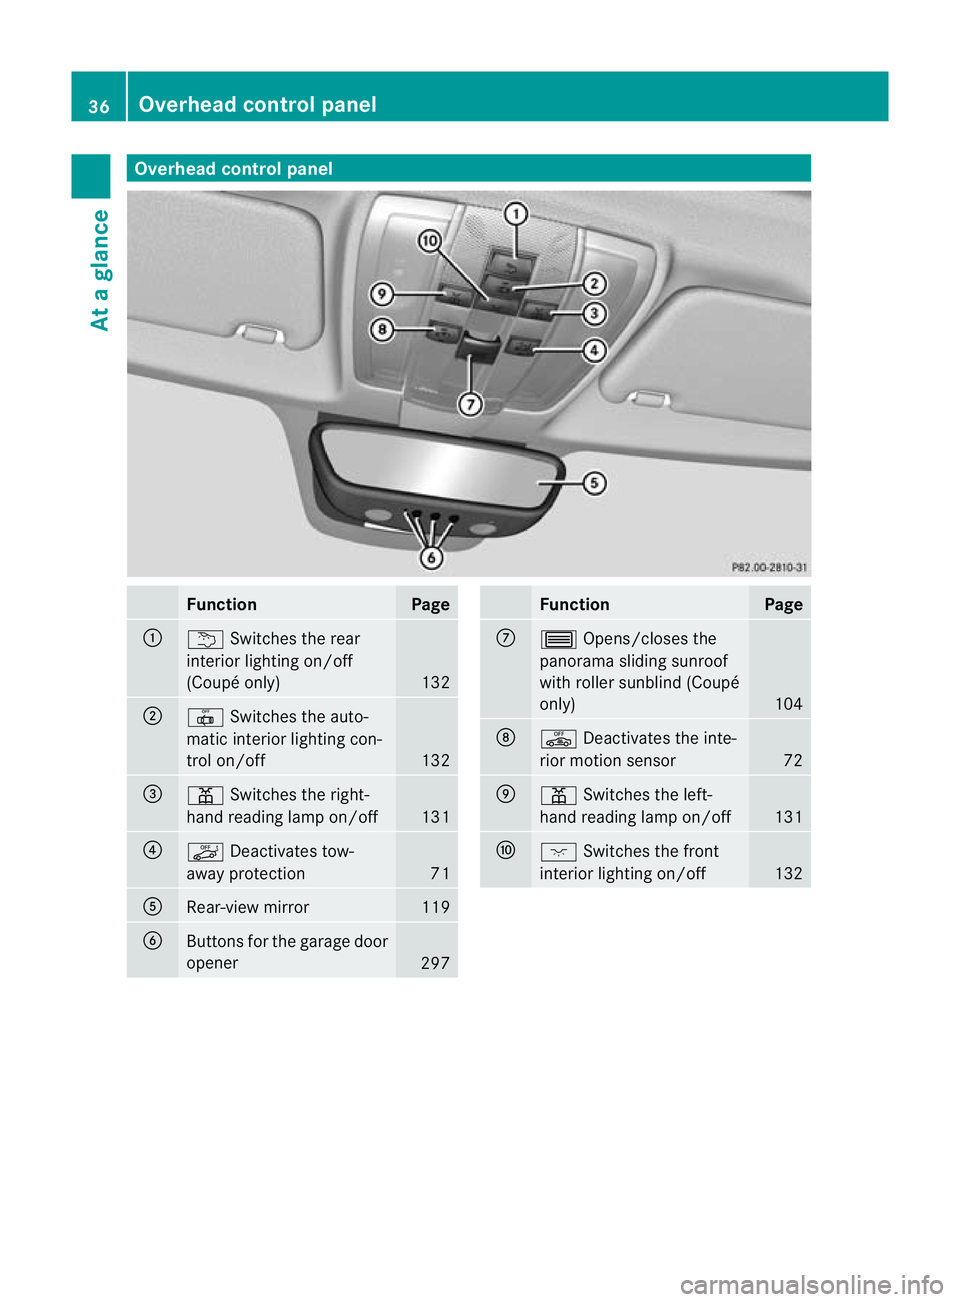 MERCEDES-BENZ E-CLASS CABRIOLET 2012 Owners Guide Overhea
dcontrol panel Function Page
:
u
Switches the rear
interio rlighting on/off
(Coupé only) 132
;
|
Switches the auto-
matic interior lighting con-
trol on/off 132
=
p
Switches the right-
hand r